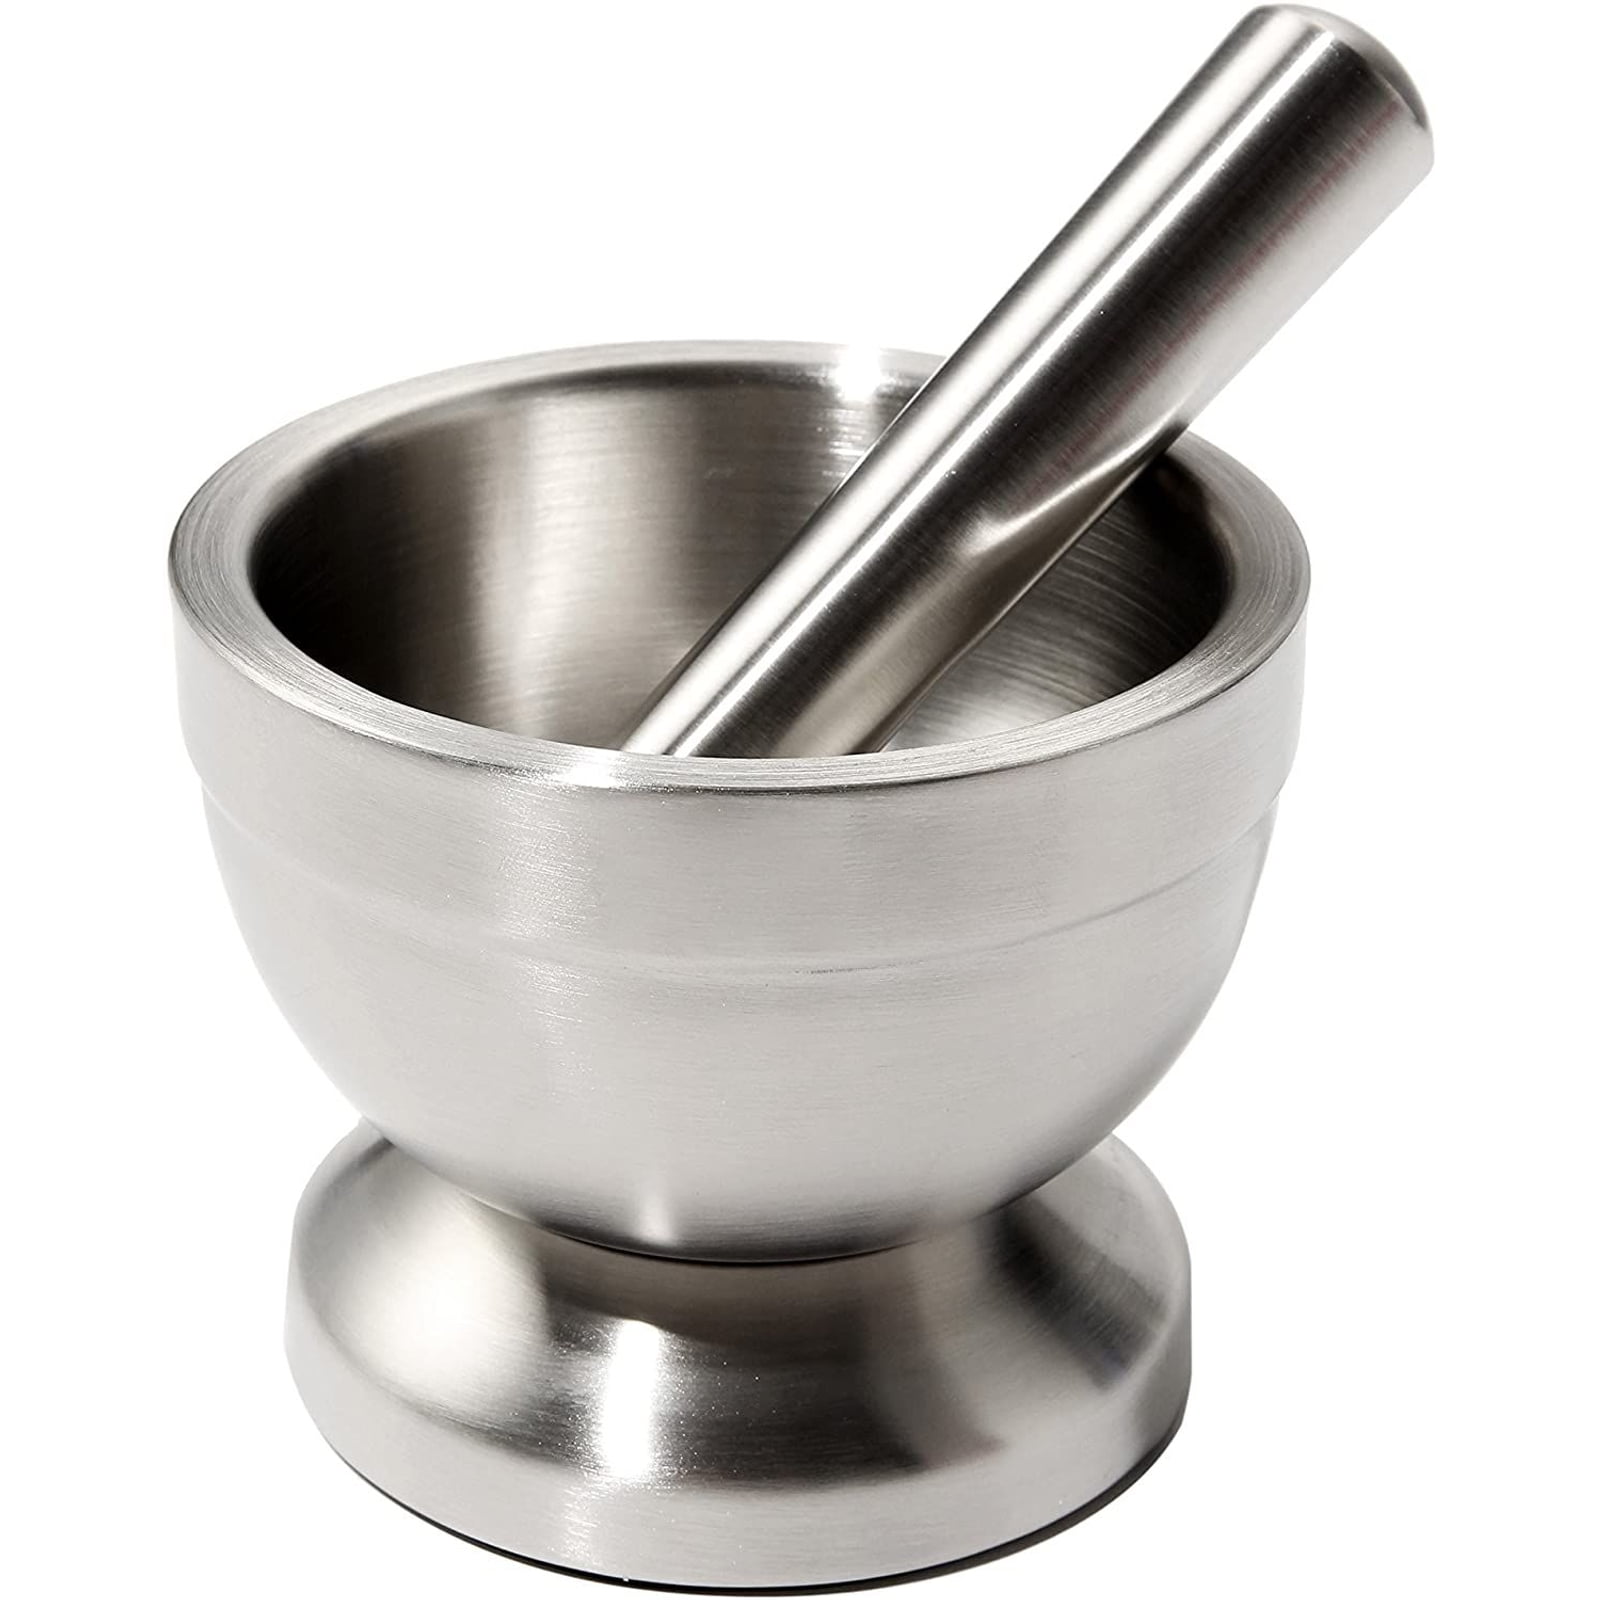 Mortar And Pestle Stainless Steel Pestal Set Grind Food Herbs Spice Heavy Duty 